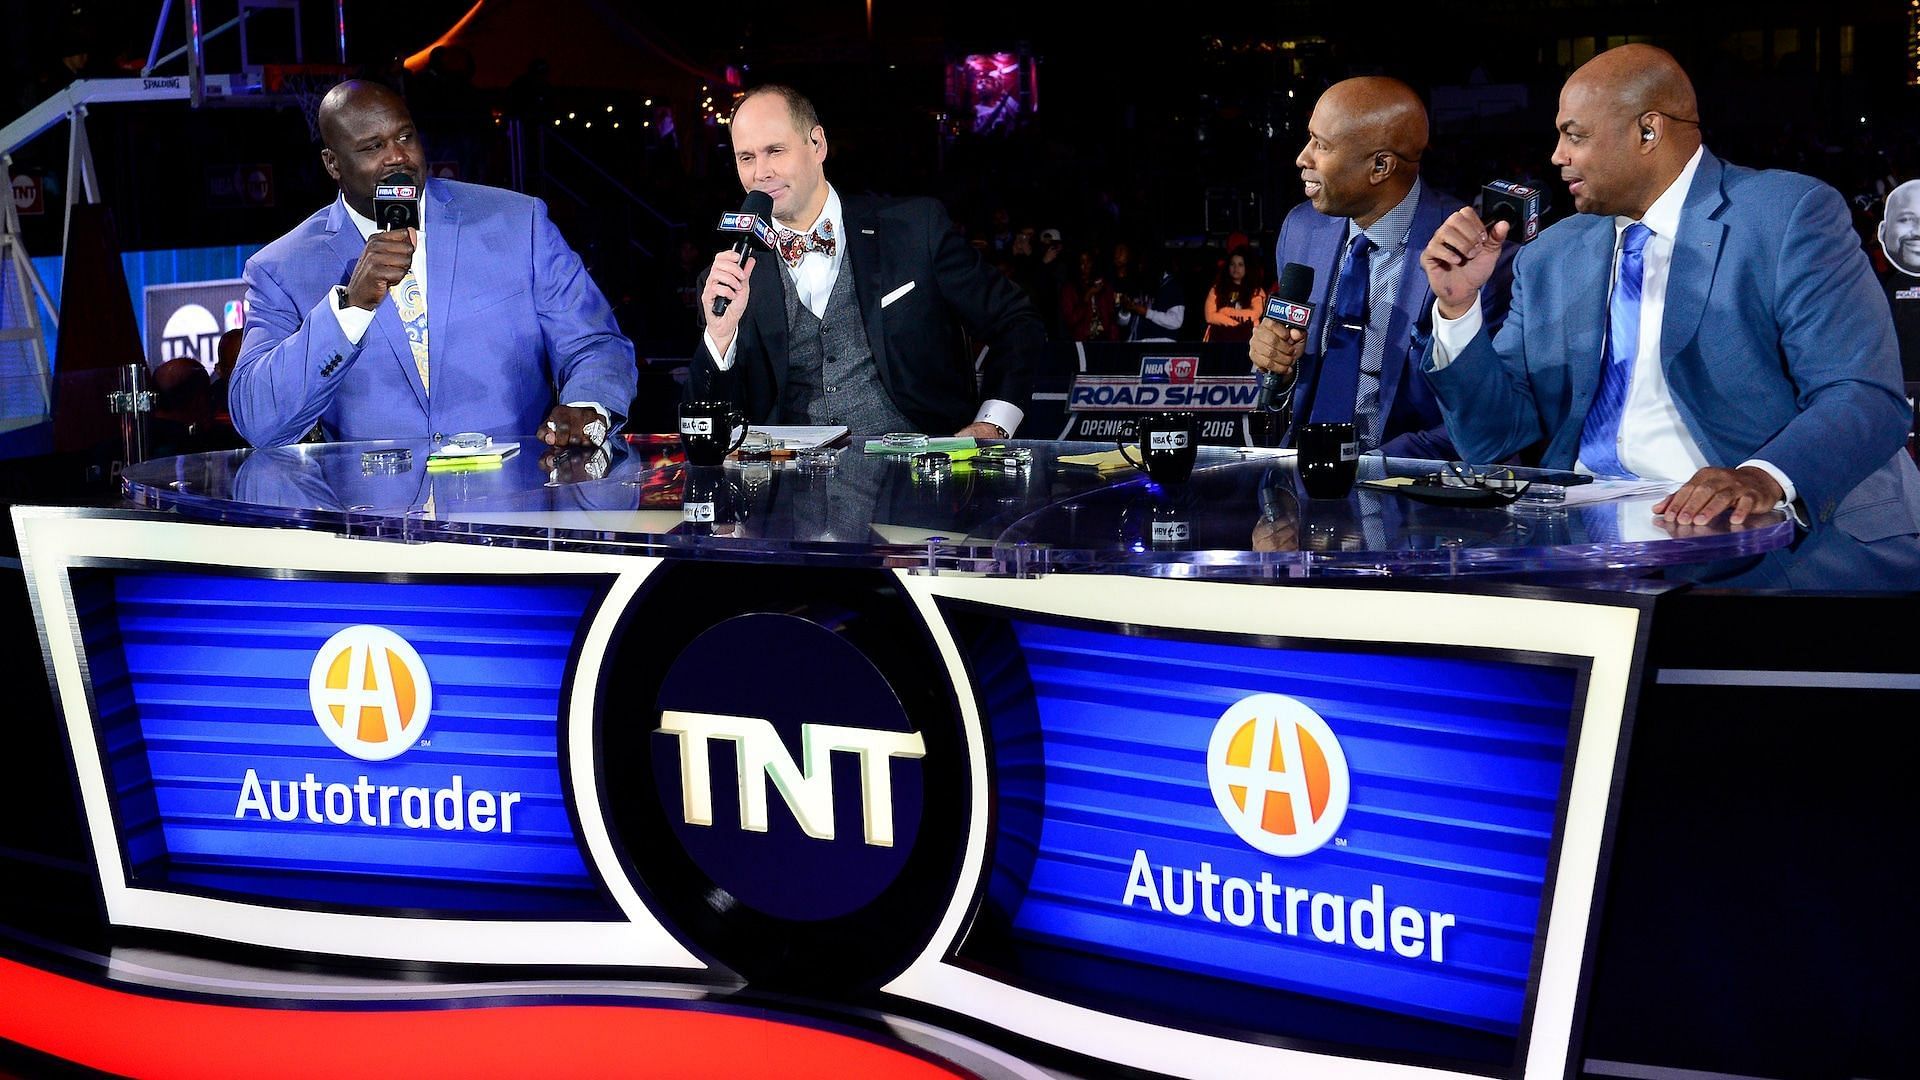 The NBA on TNT co-hosts have been going after Kenny Smith [3rd from left] since the latter returned to work after alleged &quot;food poisoning.&quot;[Photo: NBA.com]